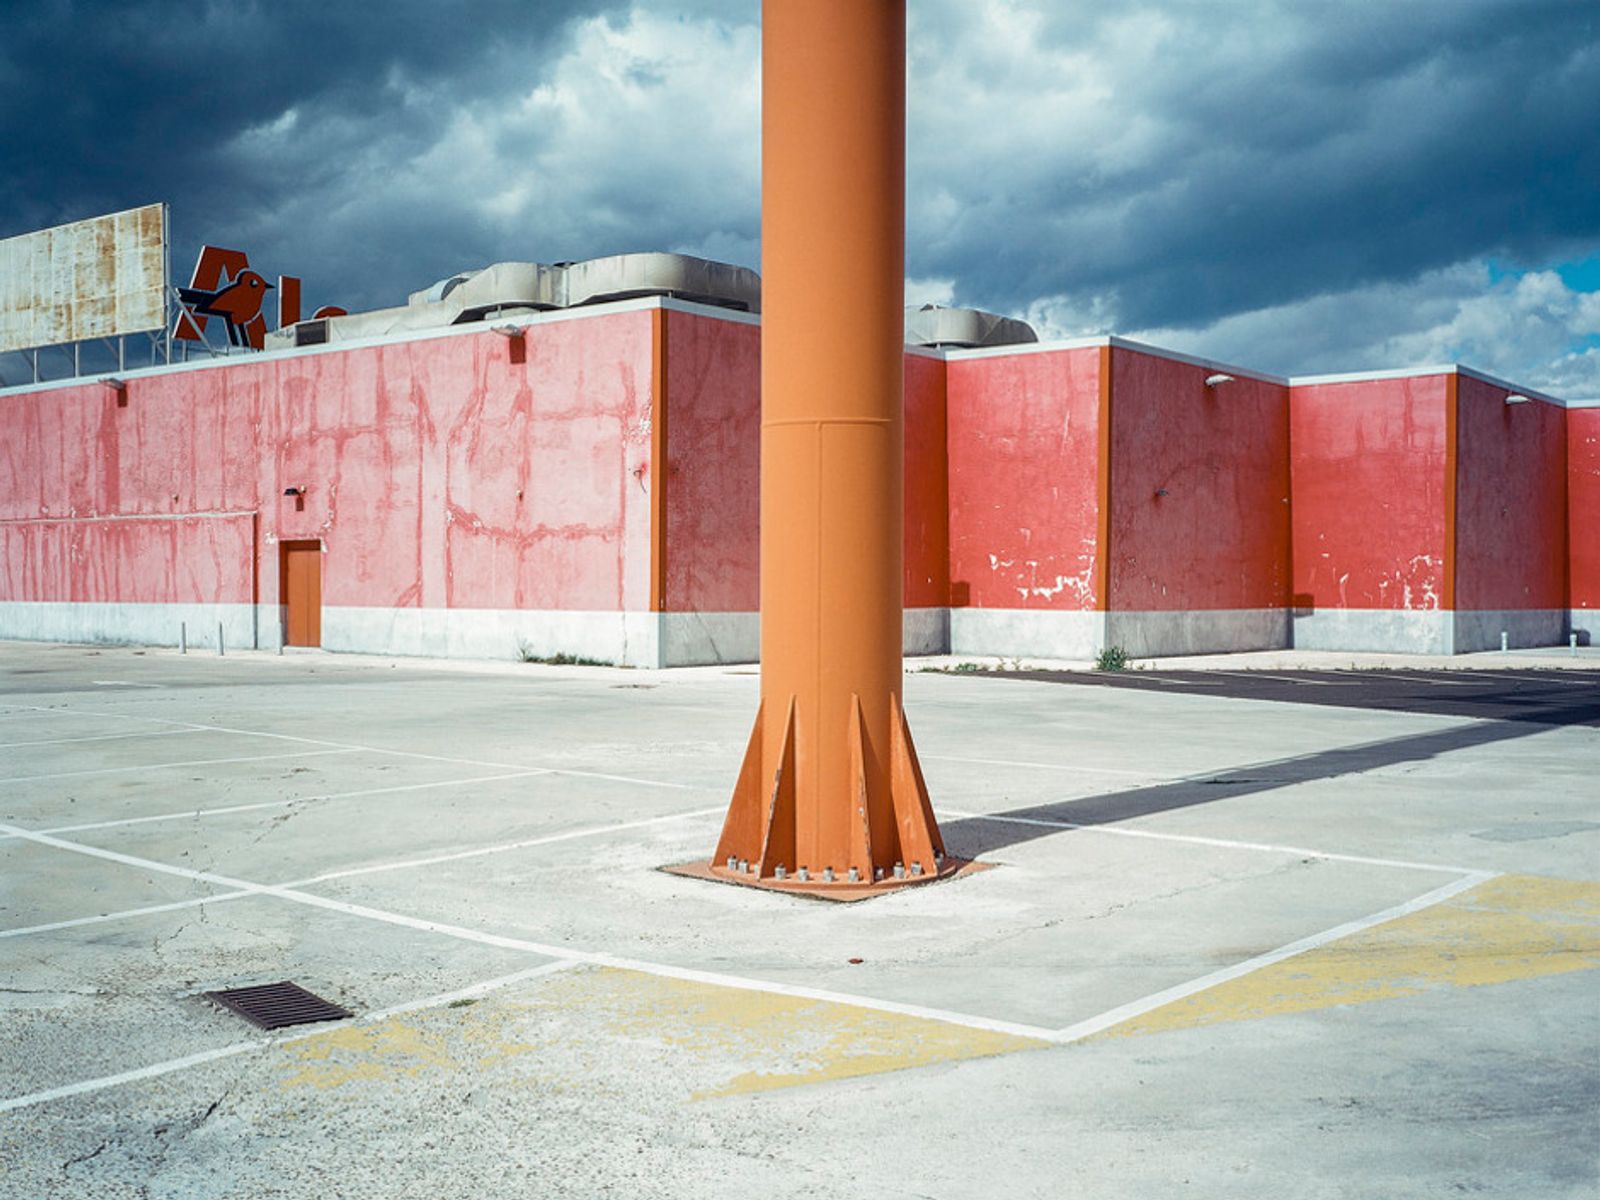 © Valerio Platania - Image from the BASE photography project